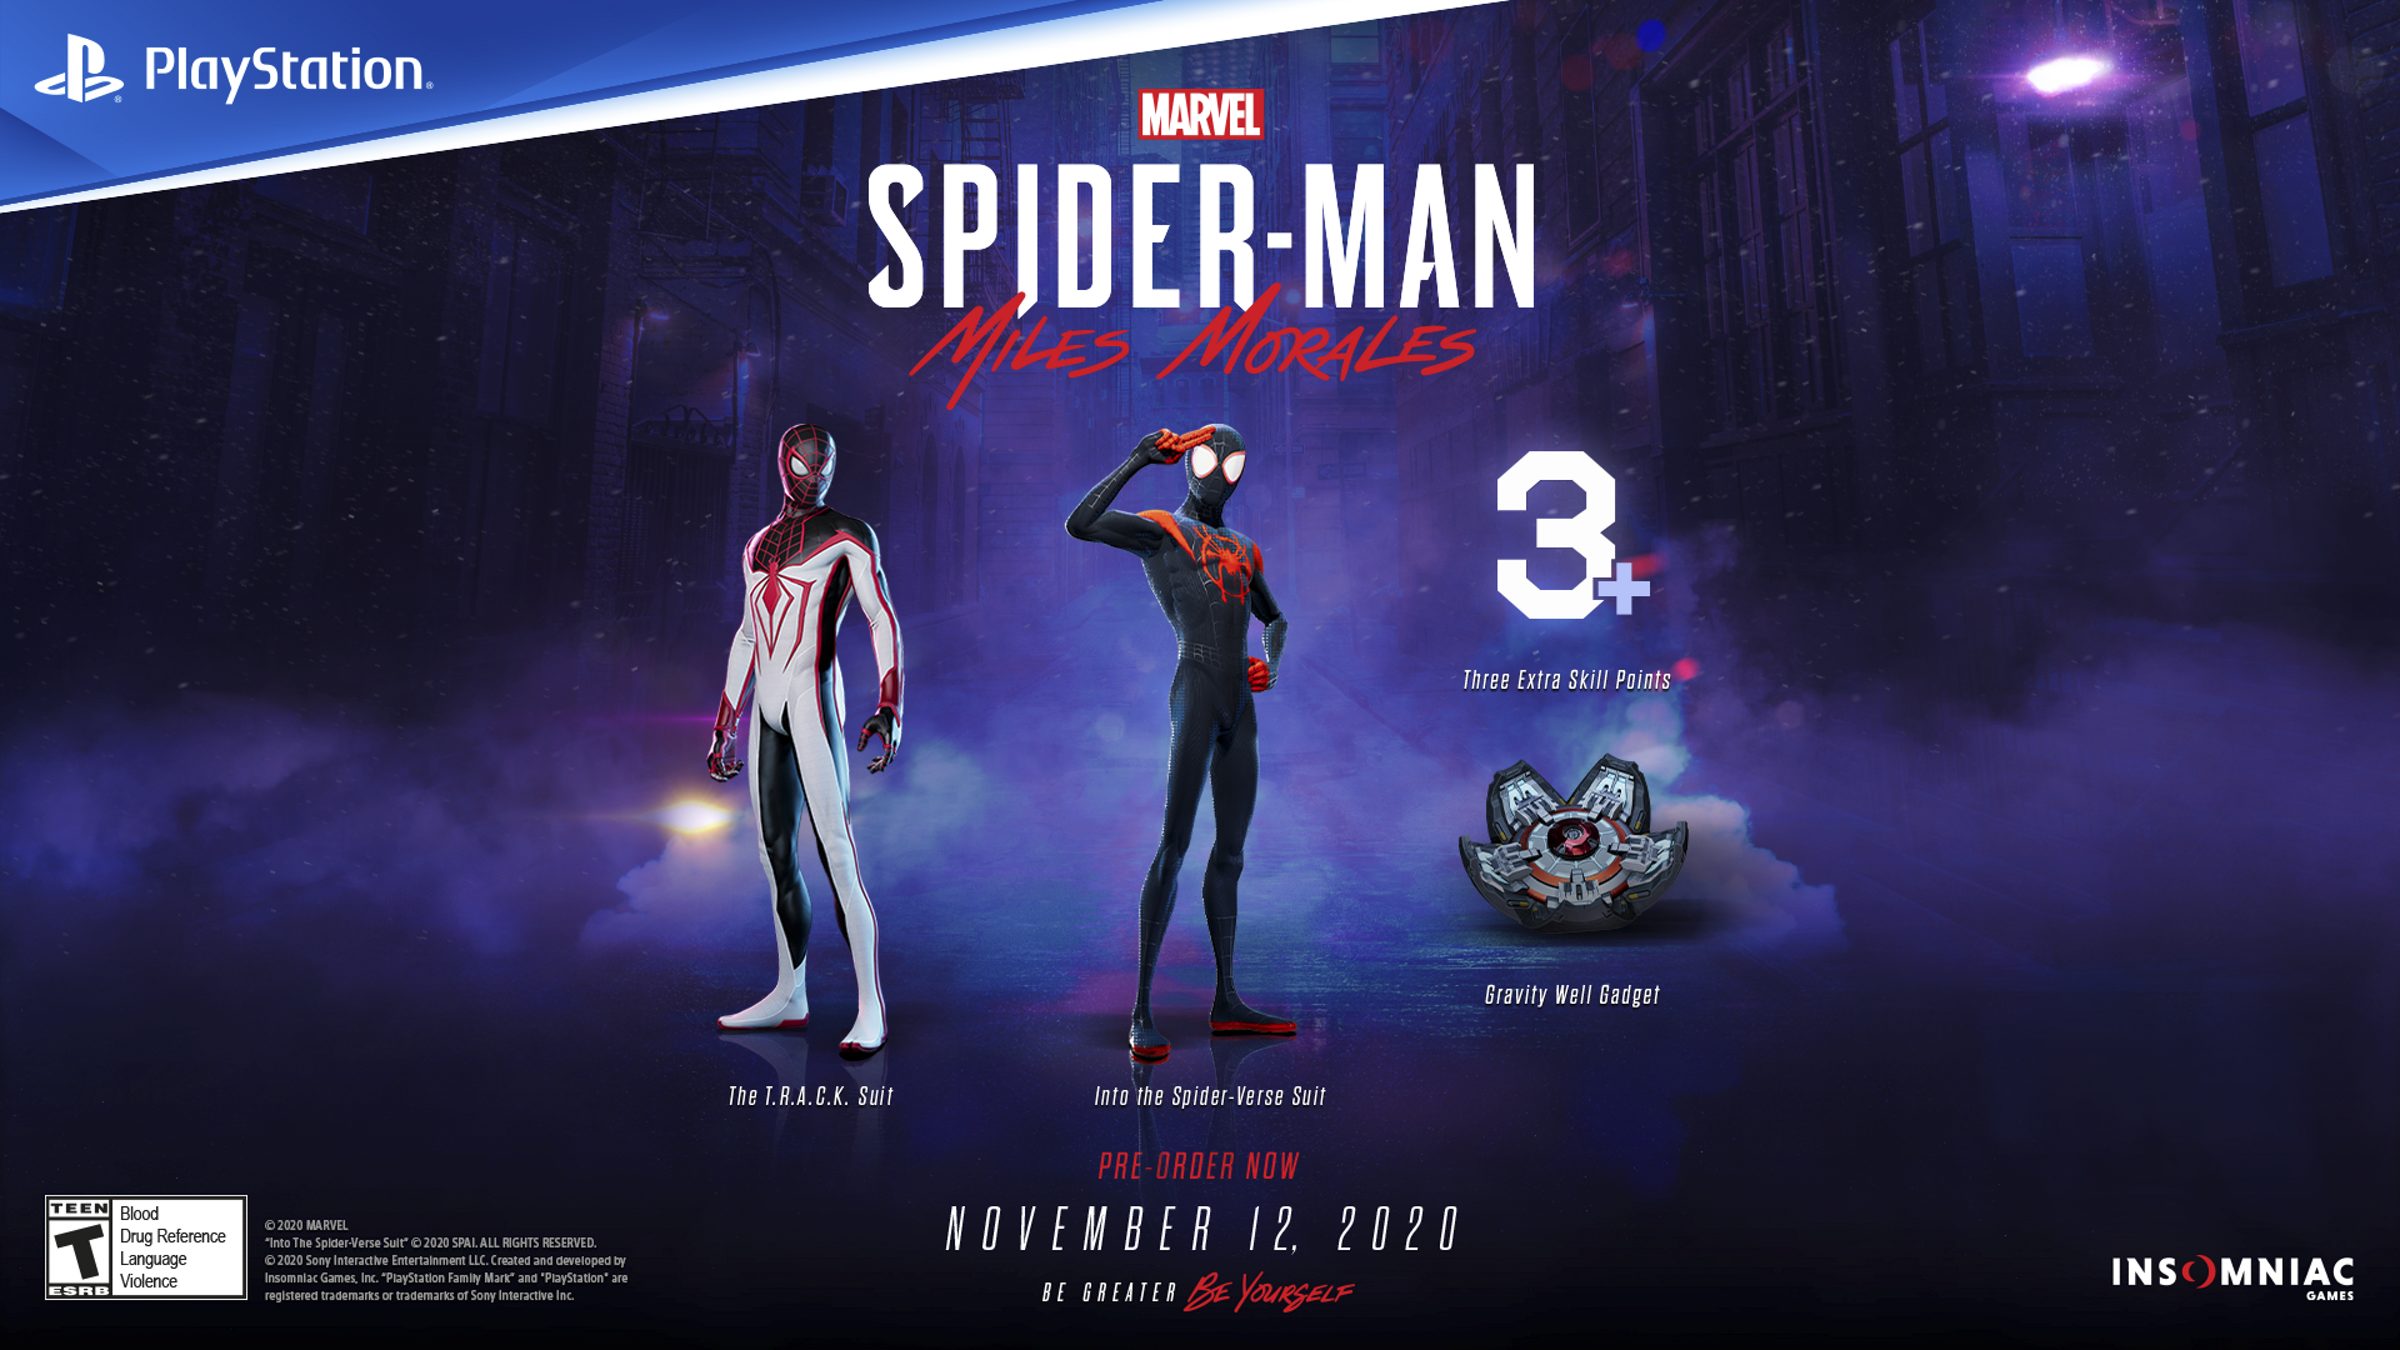 spider man miles morales ps4 ultimate edition